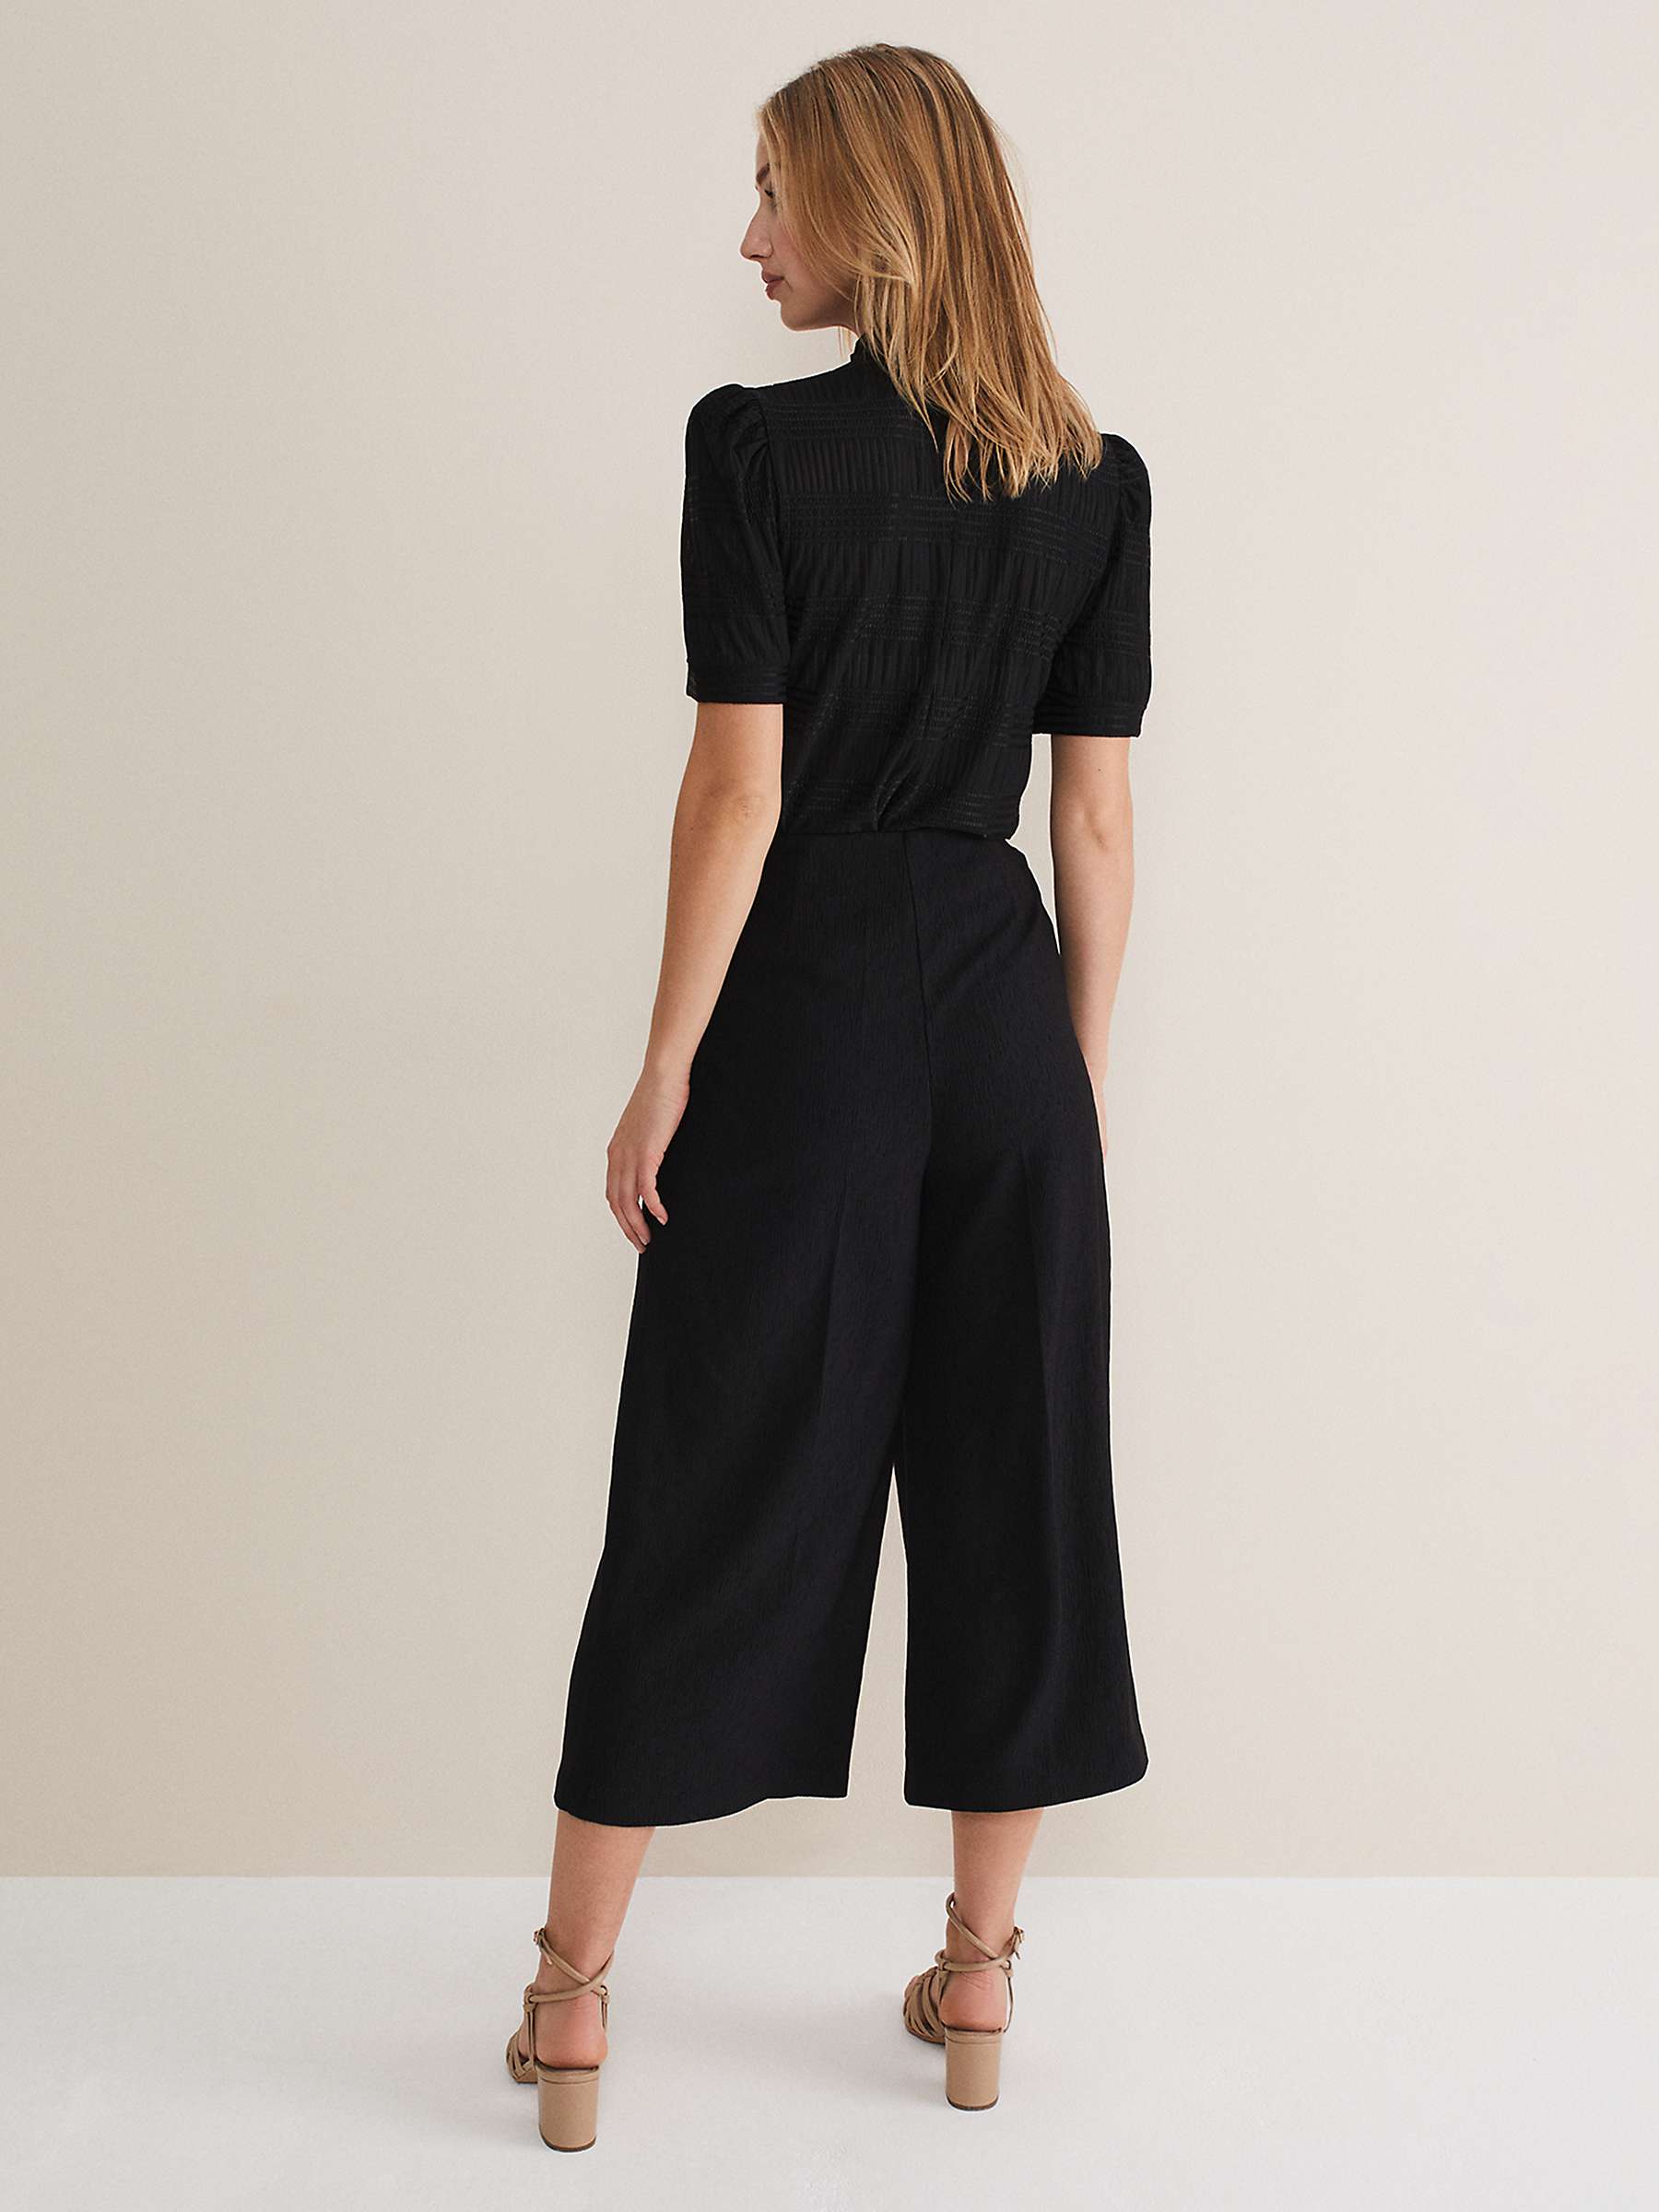 Buy Phase Eight Audrea Plain Tailored Culottes, Black Online at johnlewis.com